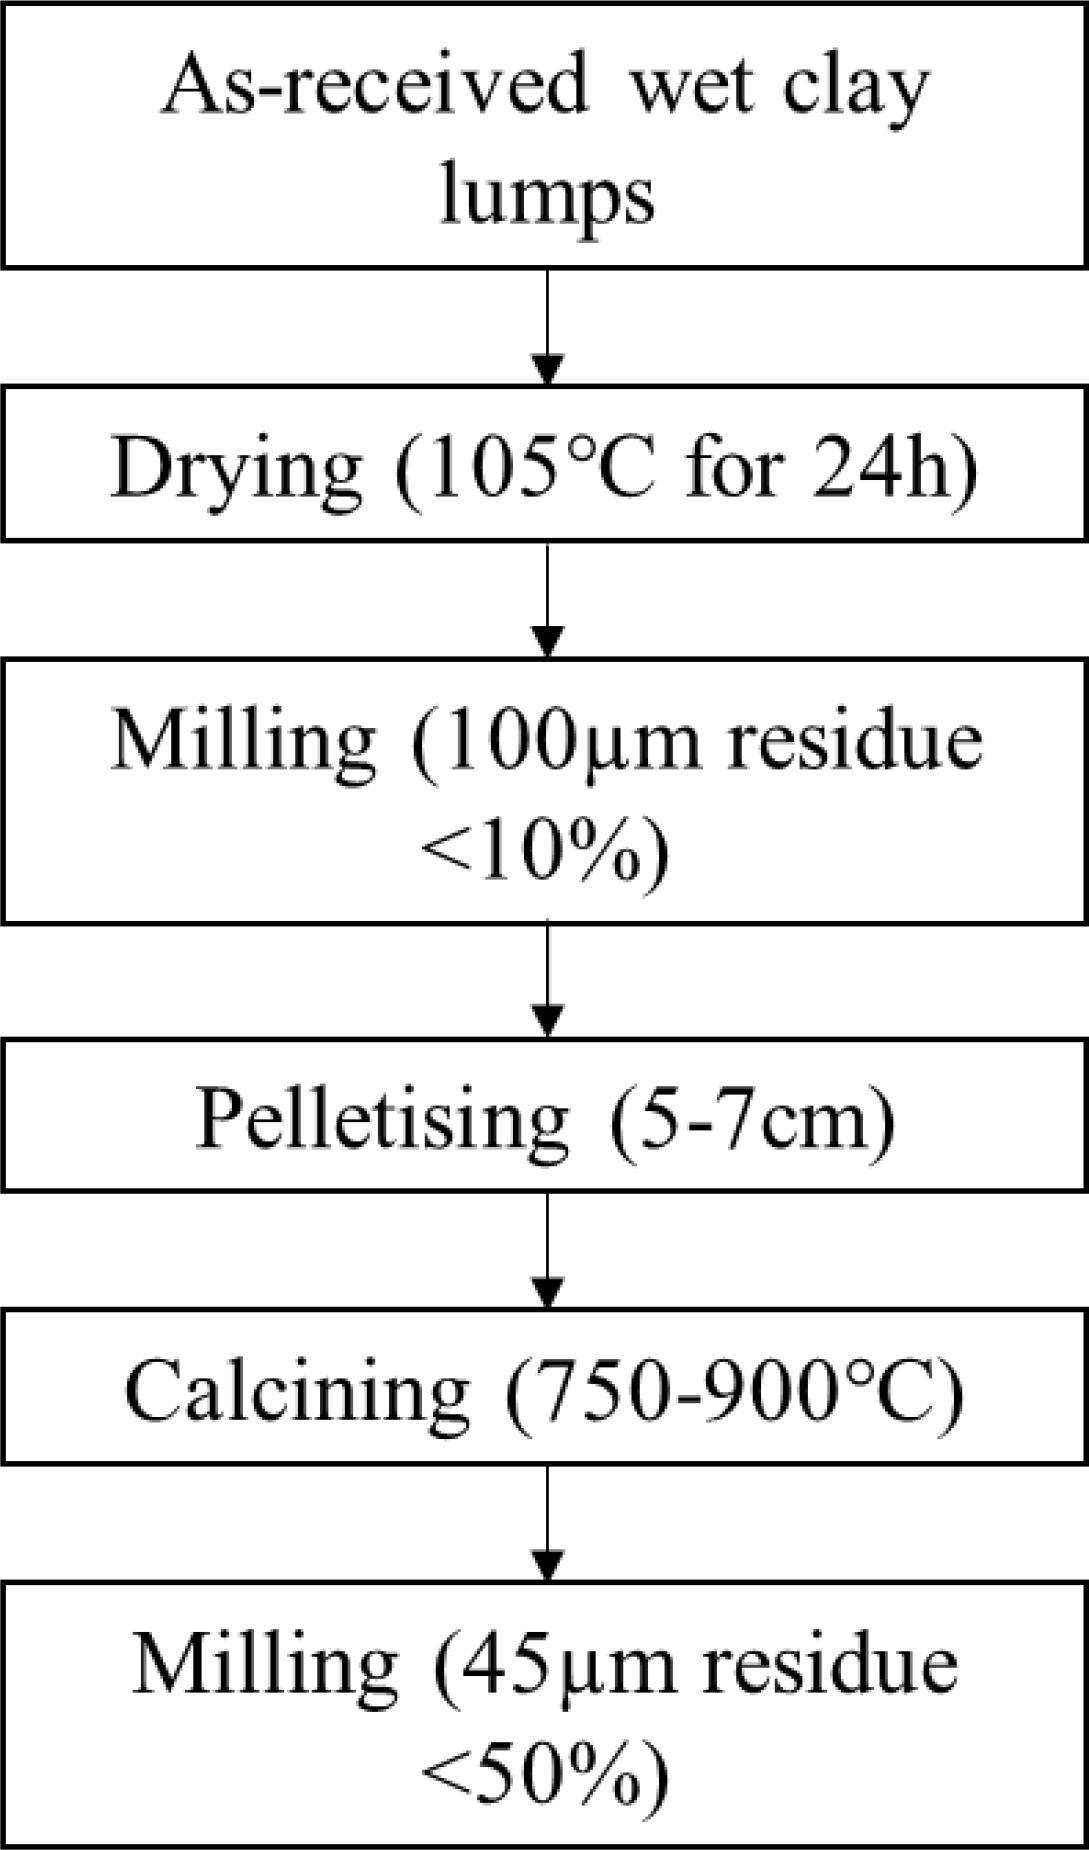 Process flowchart showing the stages prior to calcination and the follow-up milling regime.